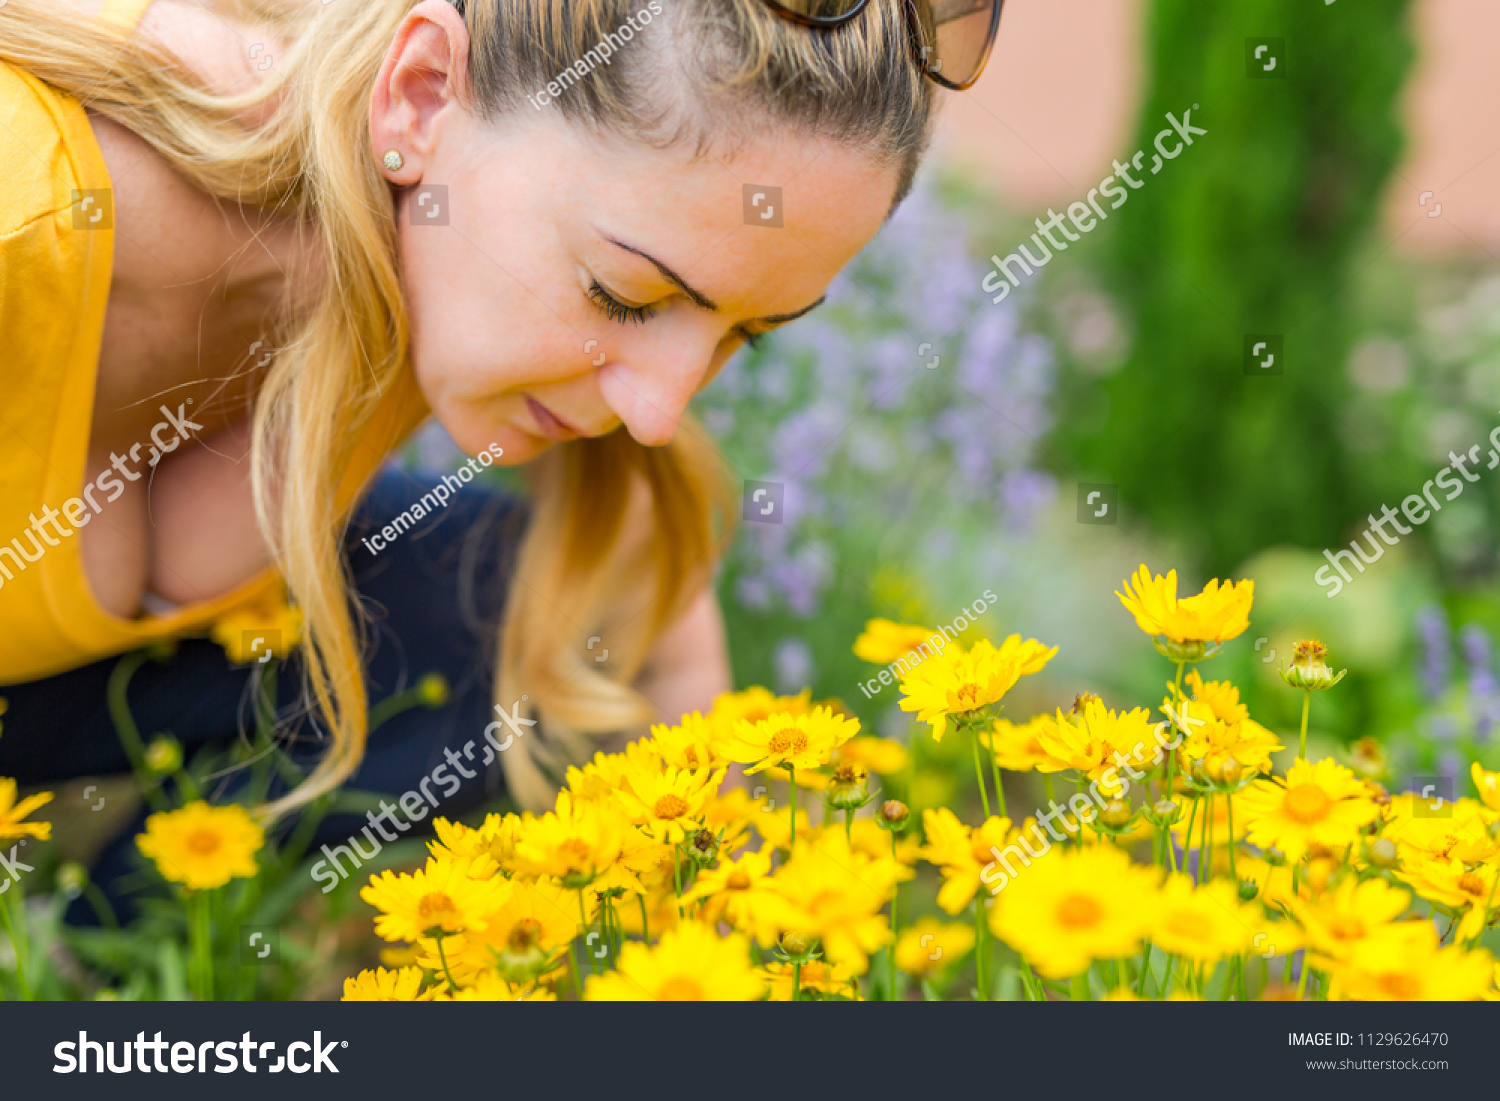 Beautiful blonde woman in yellow top smelling summer flowers in a garden background #1129626470